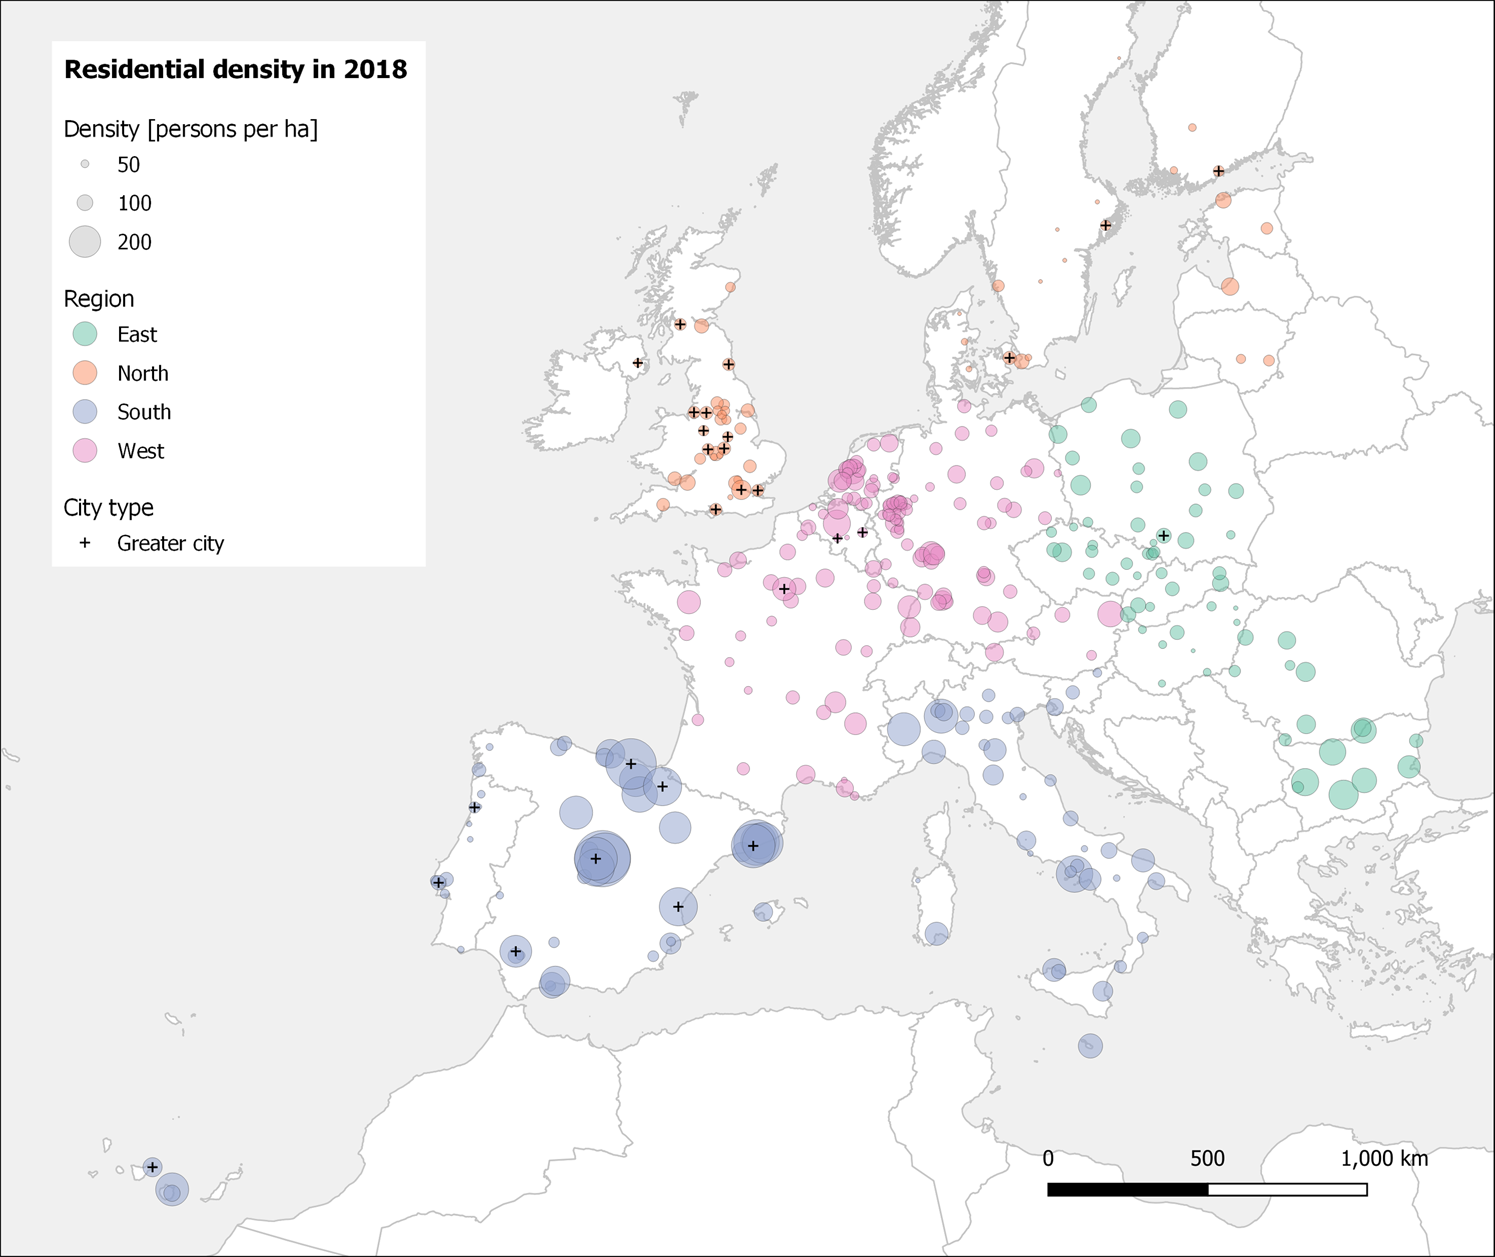 Higher immigration and lower land take rates are driving a new  densification wave in European cities | npj Urban Sustainability